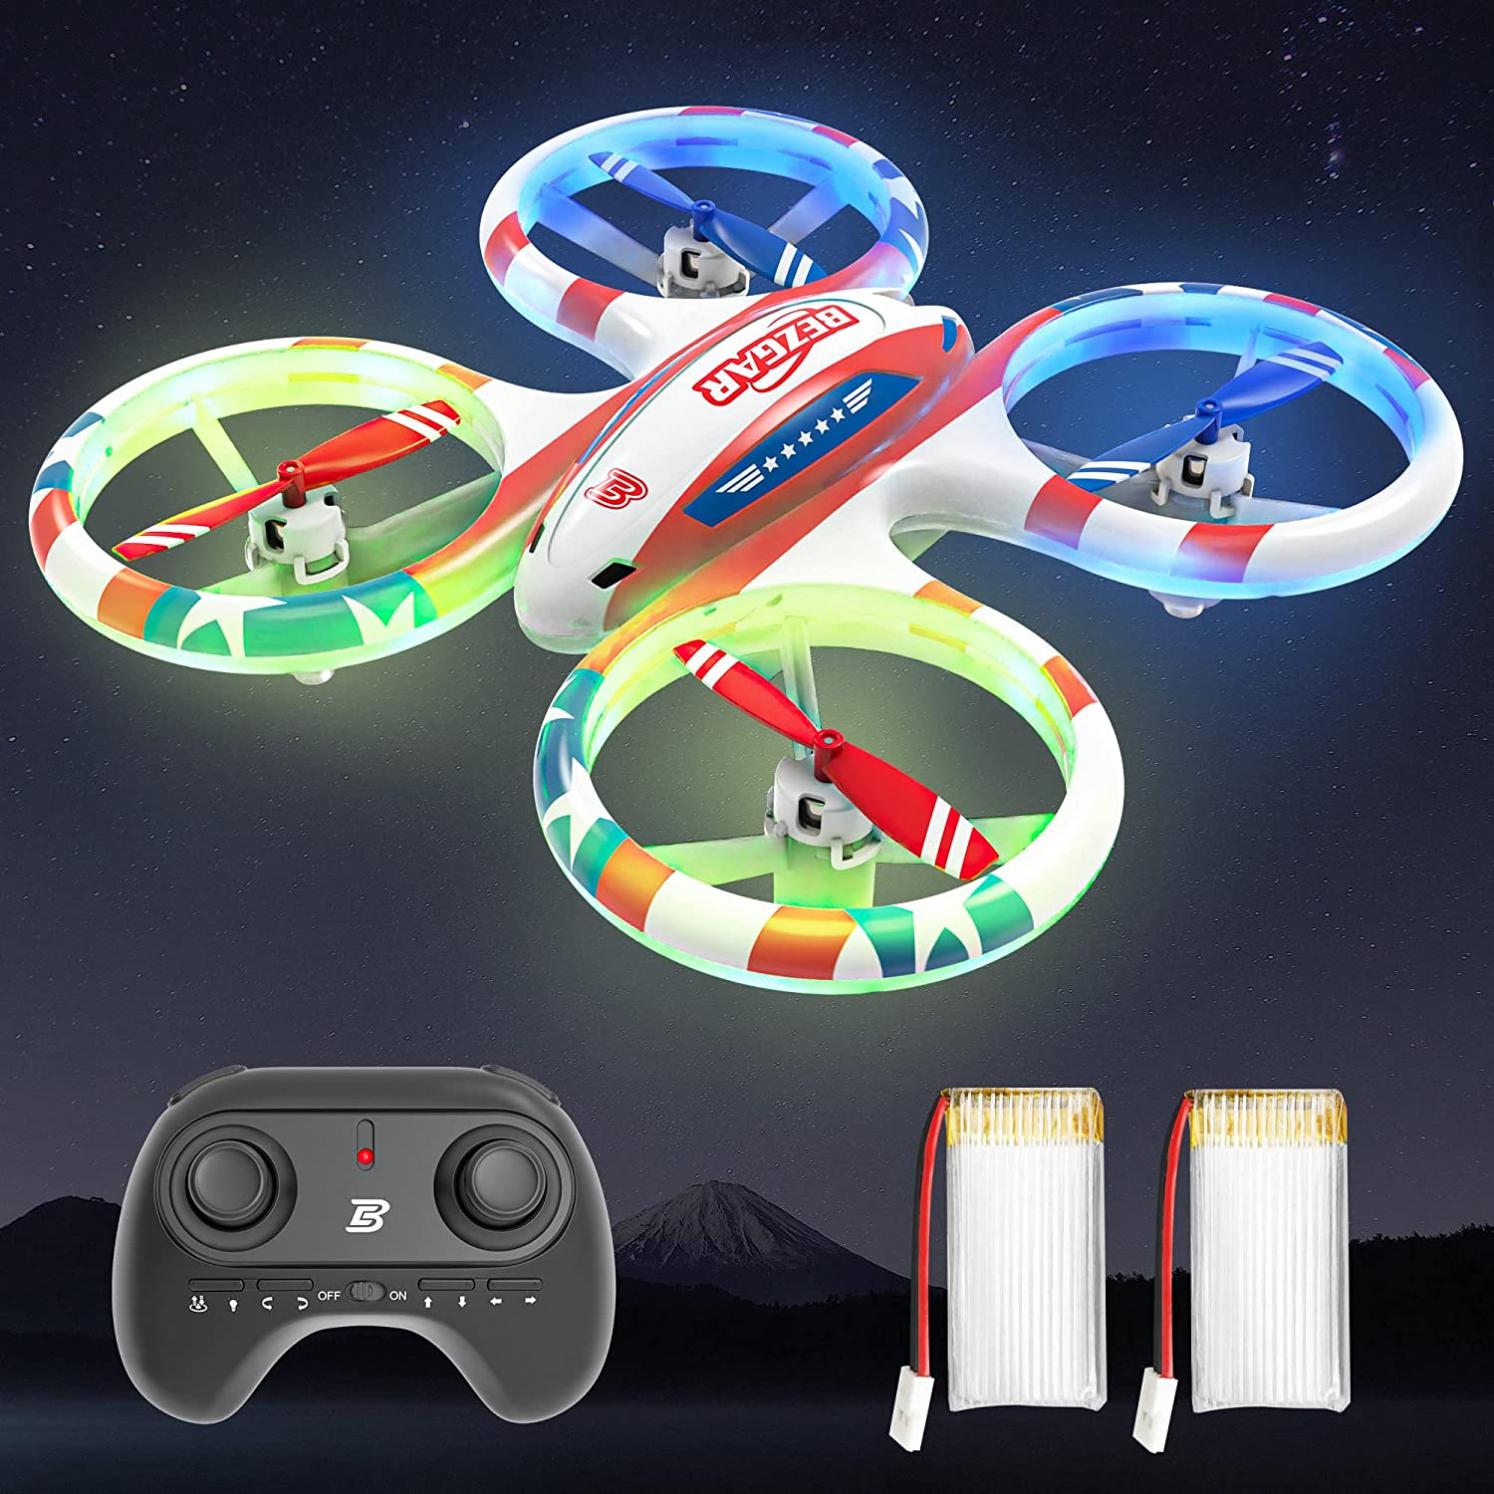 BEZGAR HQ051 Mini Drone for Kids - RC Drone Indoor, LED Remote Control Drone with 3D Flip, Headless Mode and 2 Speed Propeller Full Protect Small Drone for Beginners, Great Gifts for Boys and Girls